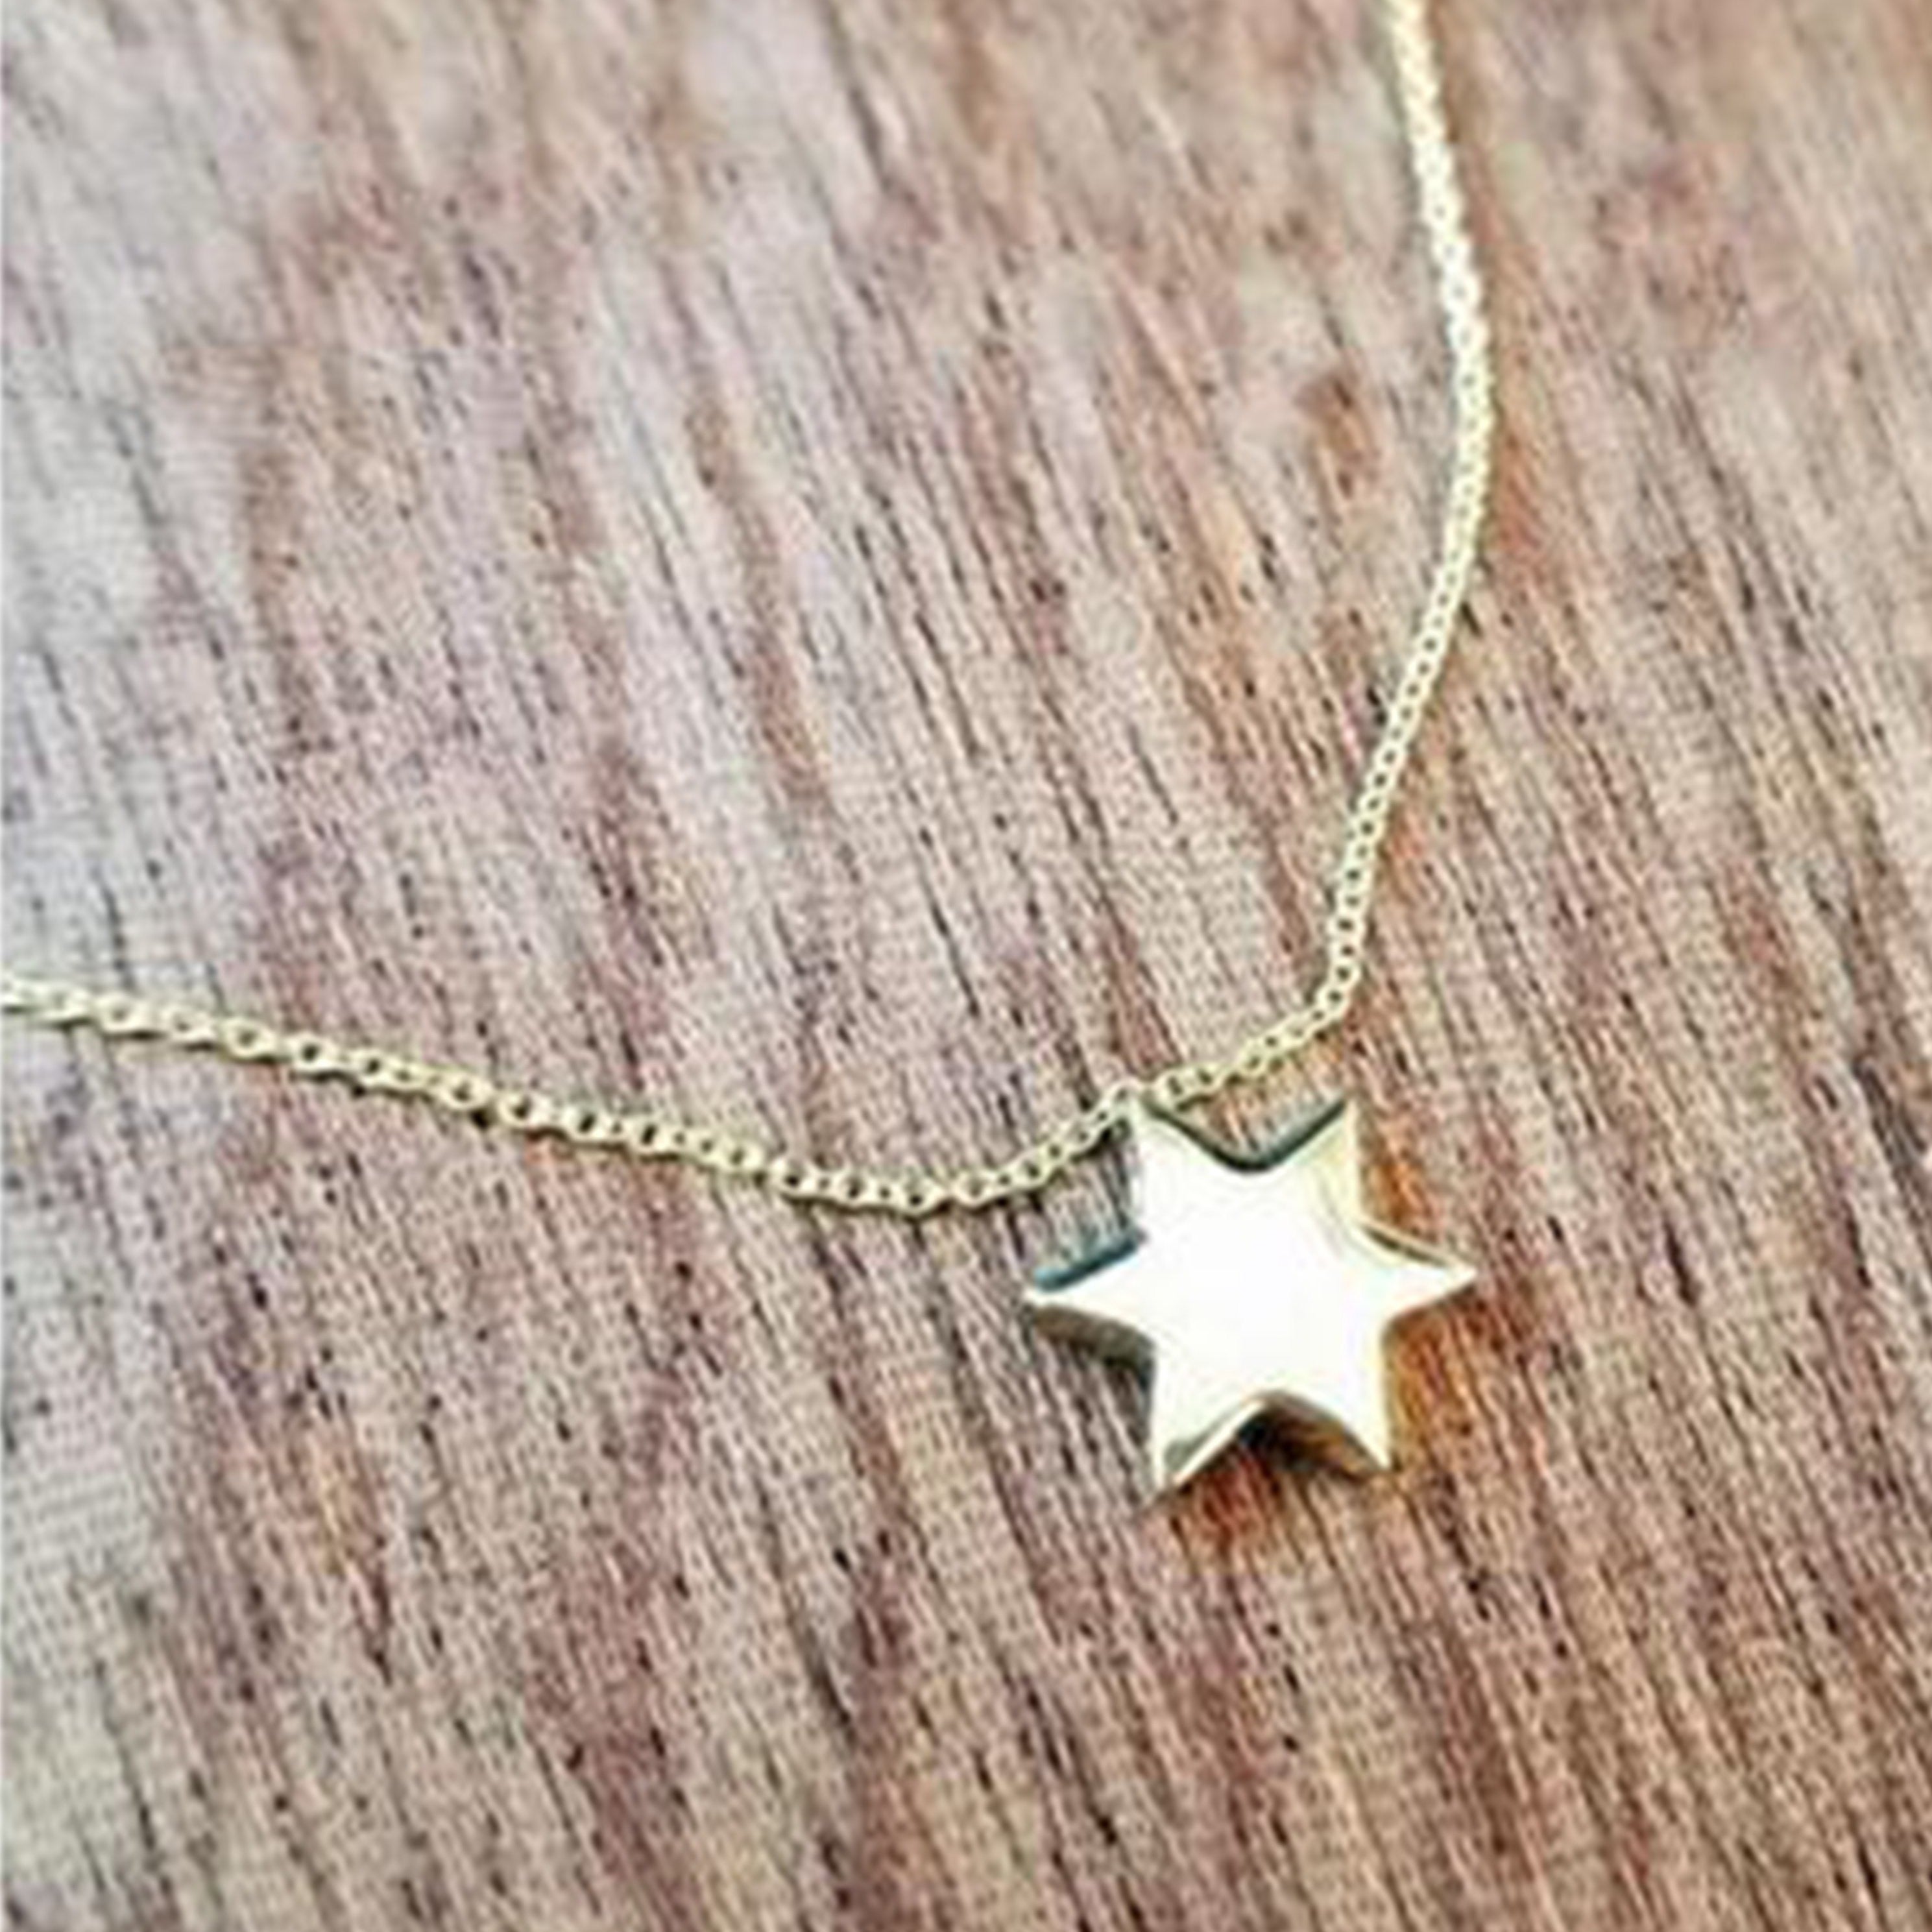 Star of David Necklace in 14k Gold